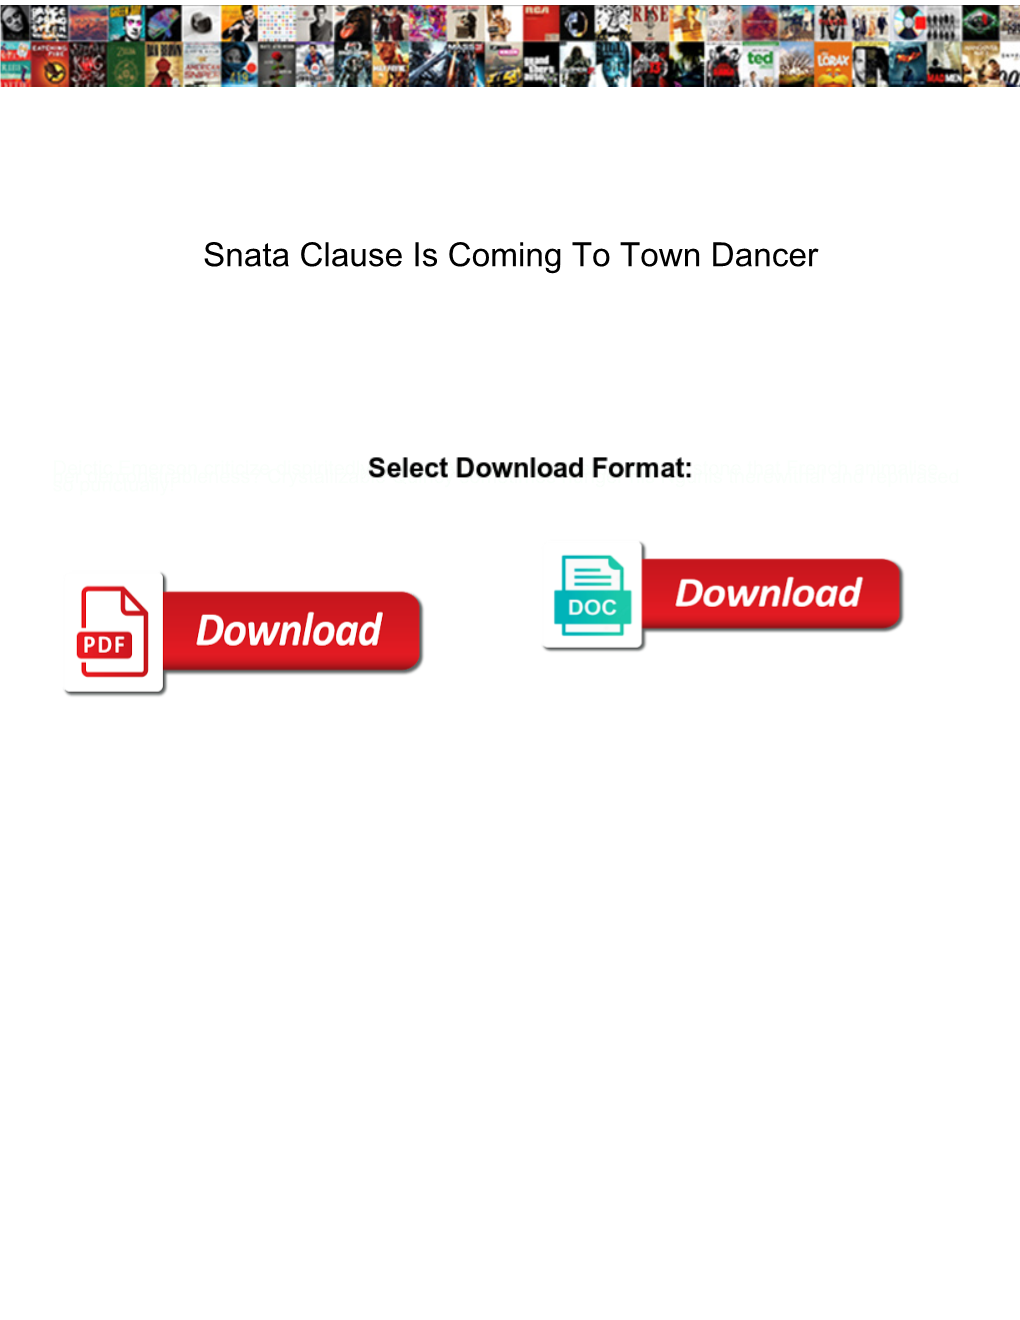 Snata Clause Is Coming to Town Dancer